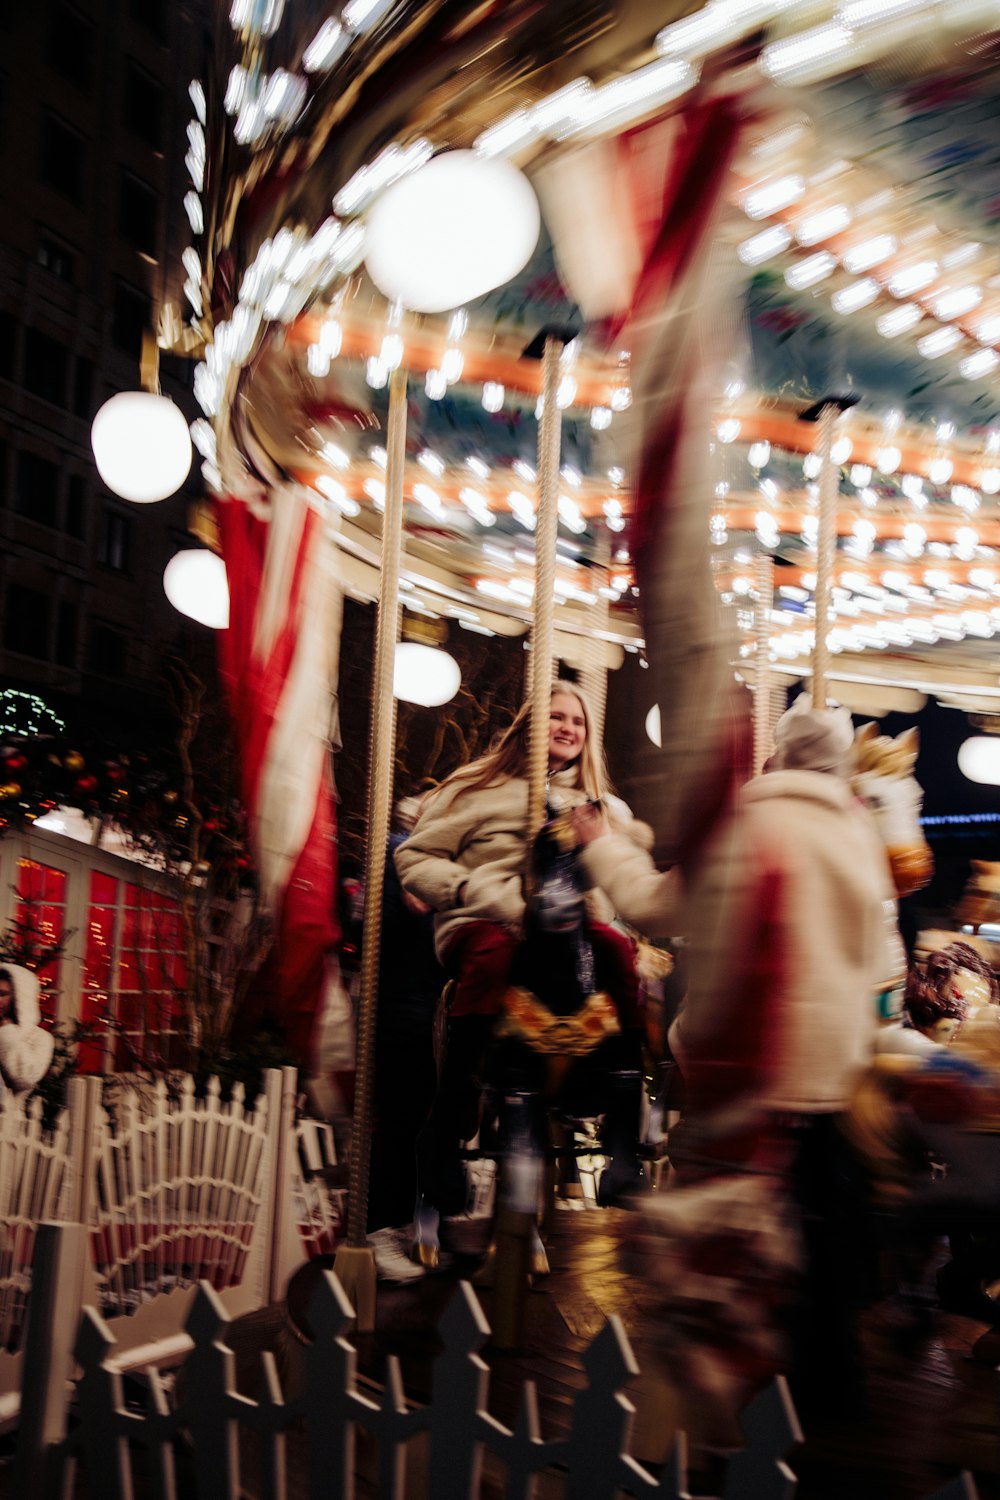 a blurry photo of a woman riding a merry go round